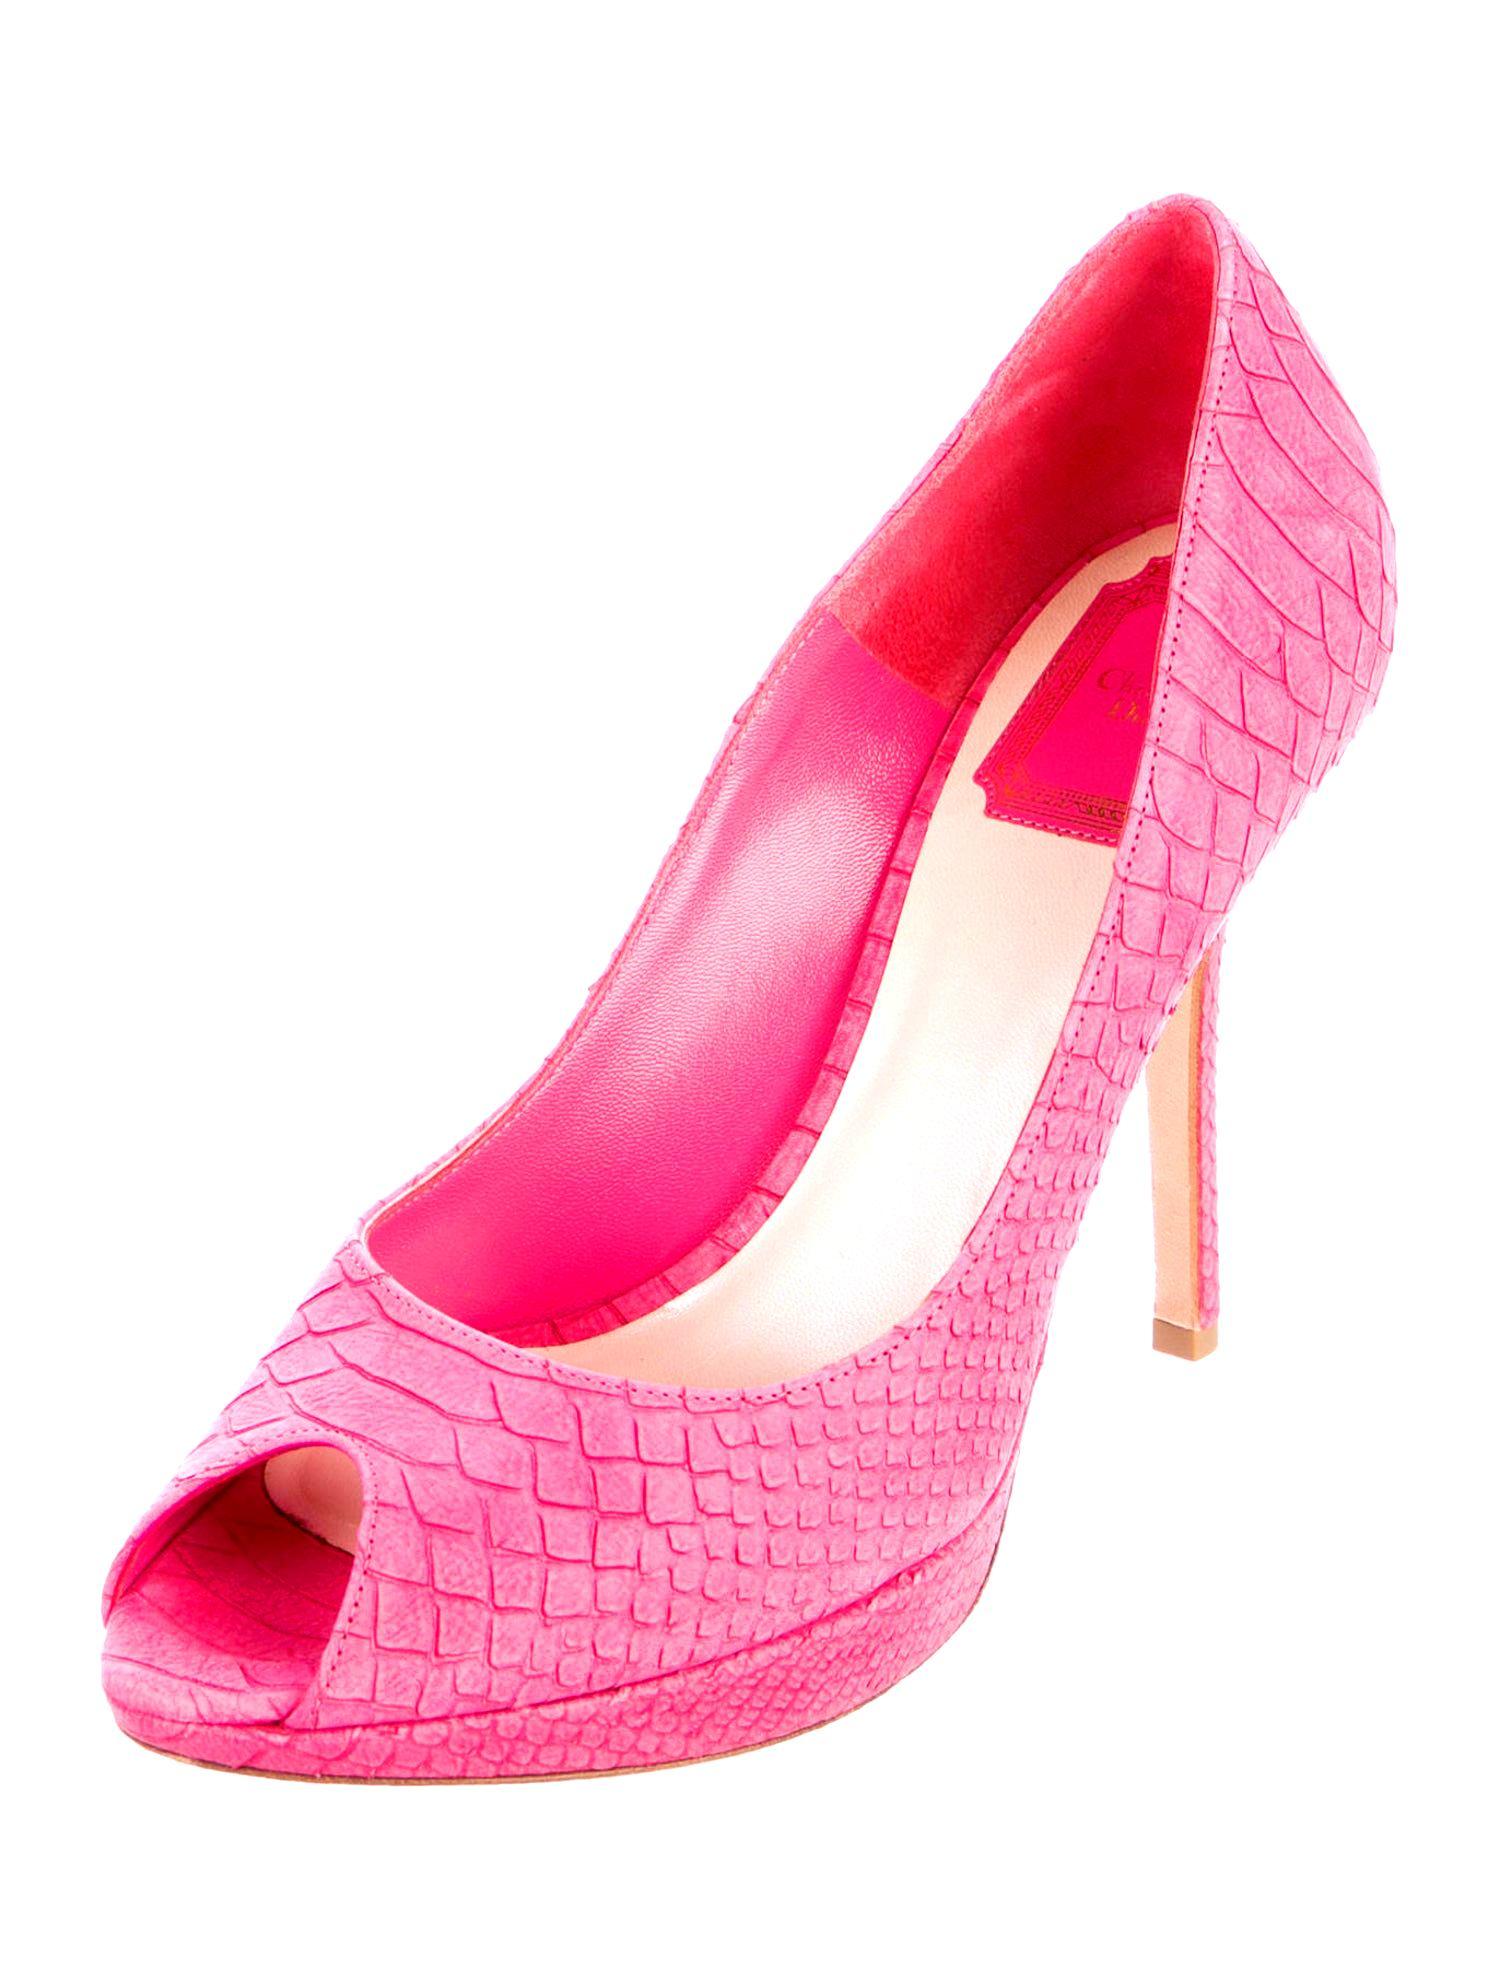 

Beautiful hot pink peep toe sandals by Christian Dior
Platform High Heel Pumps
DIOR logo plate on back of each heel.
Size EU 39
Made in Italy
RRP 1299$ plus taxes

Brandnew, never worn
